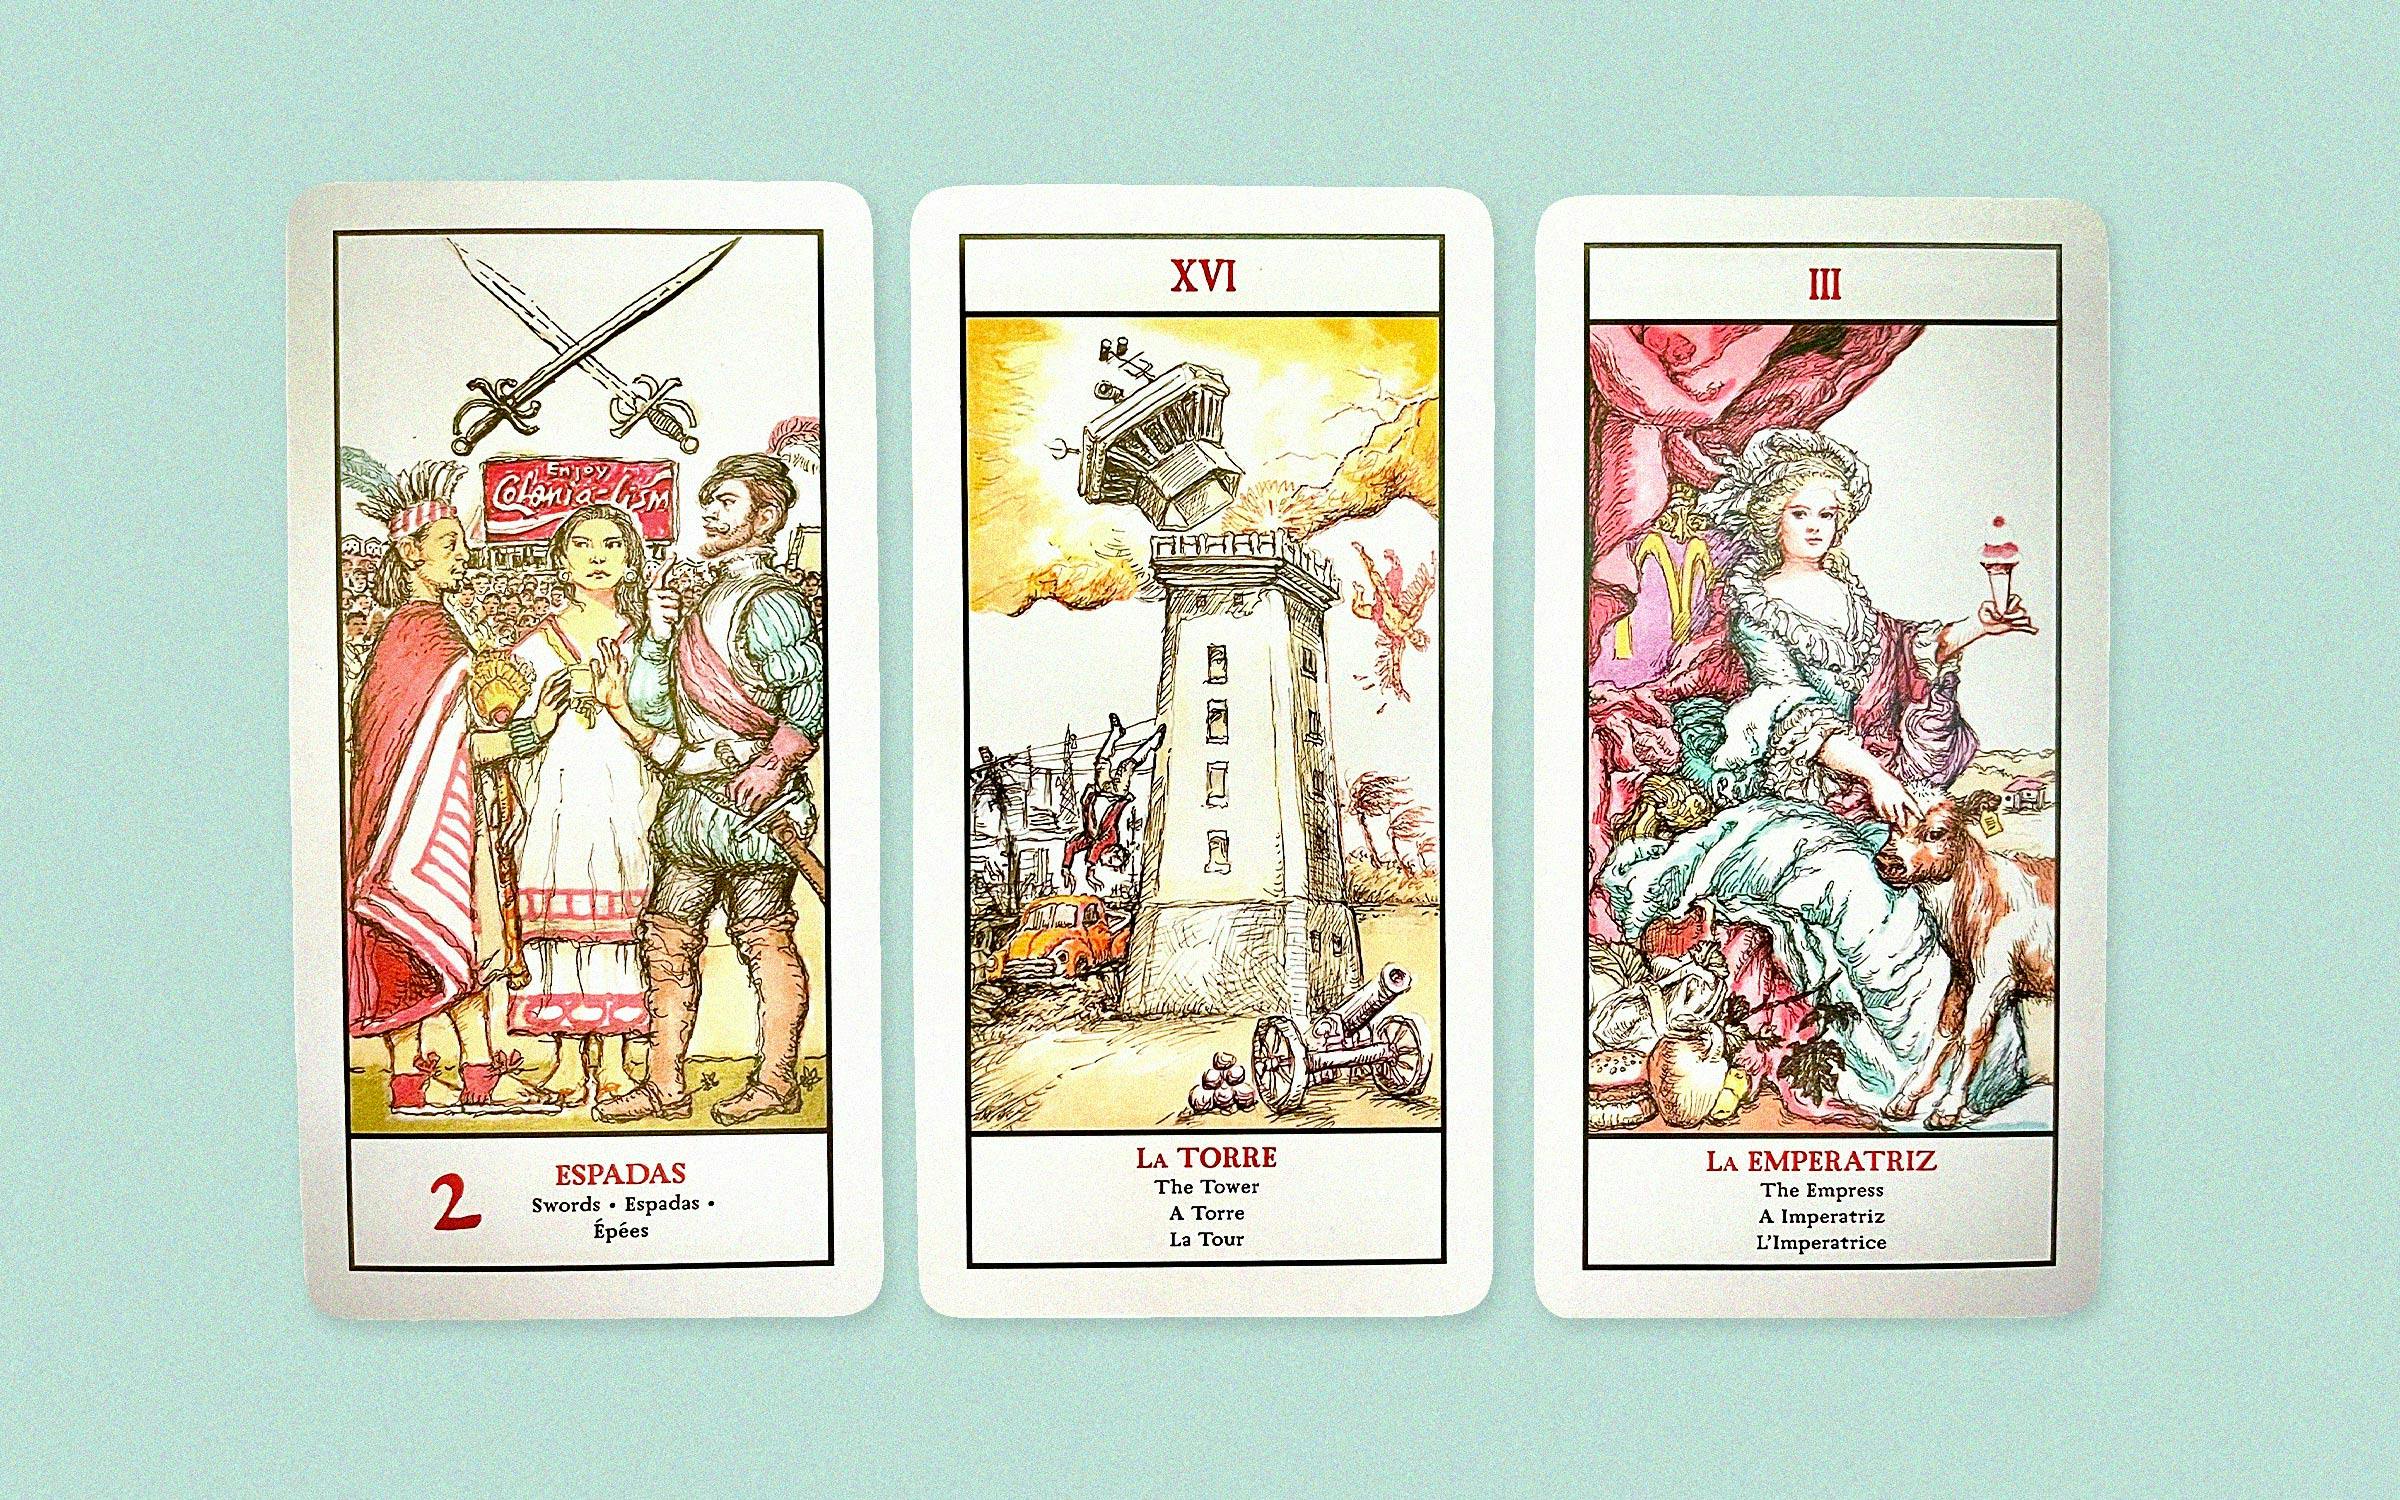 A Artist Justice, Humor, Insight Into This "Neocolonial" Tarot